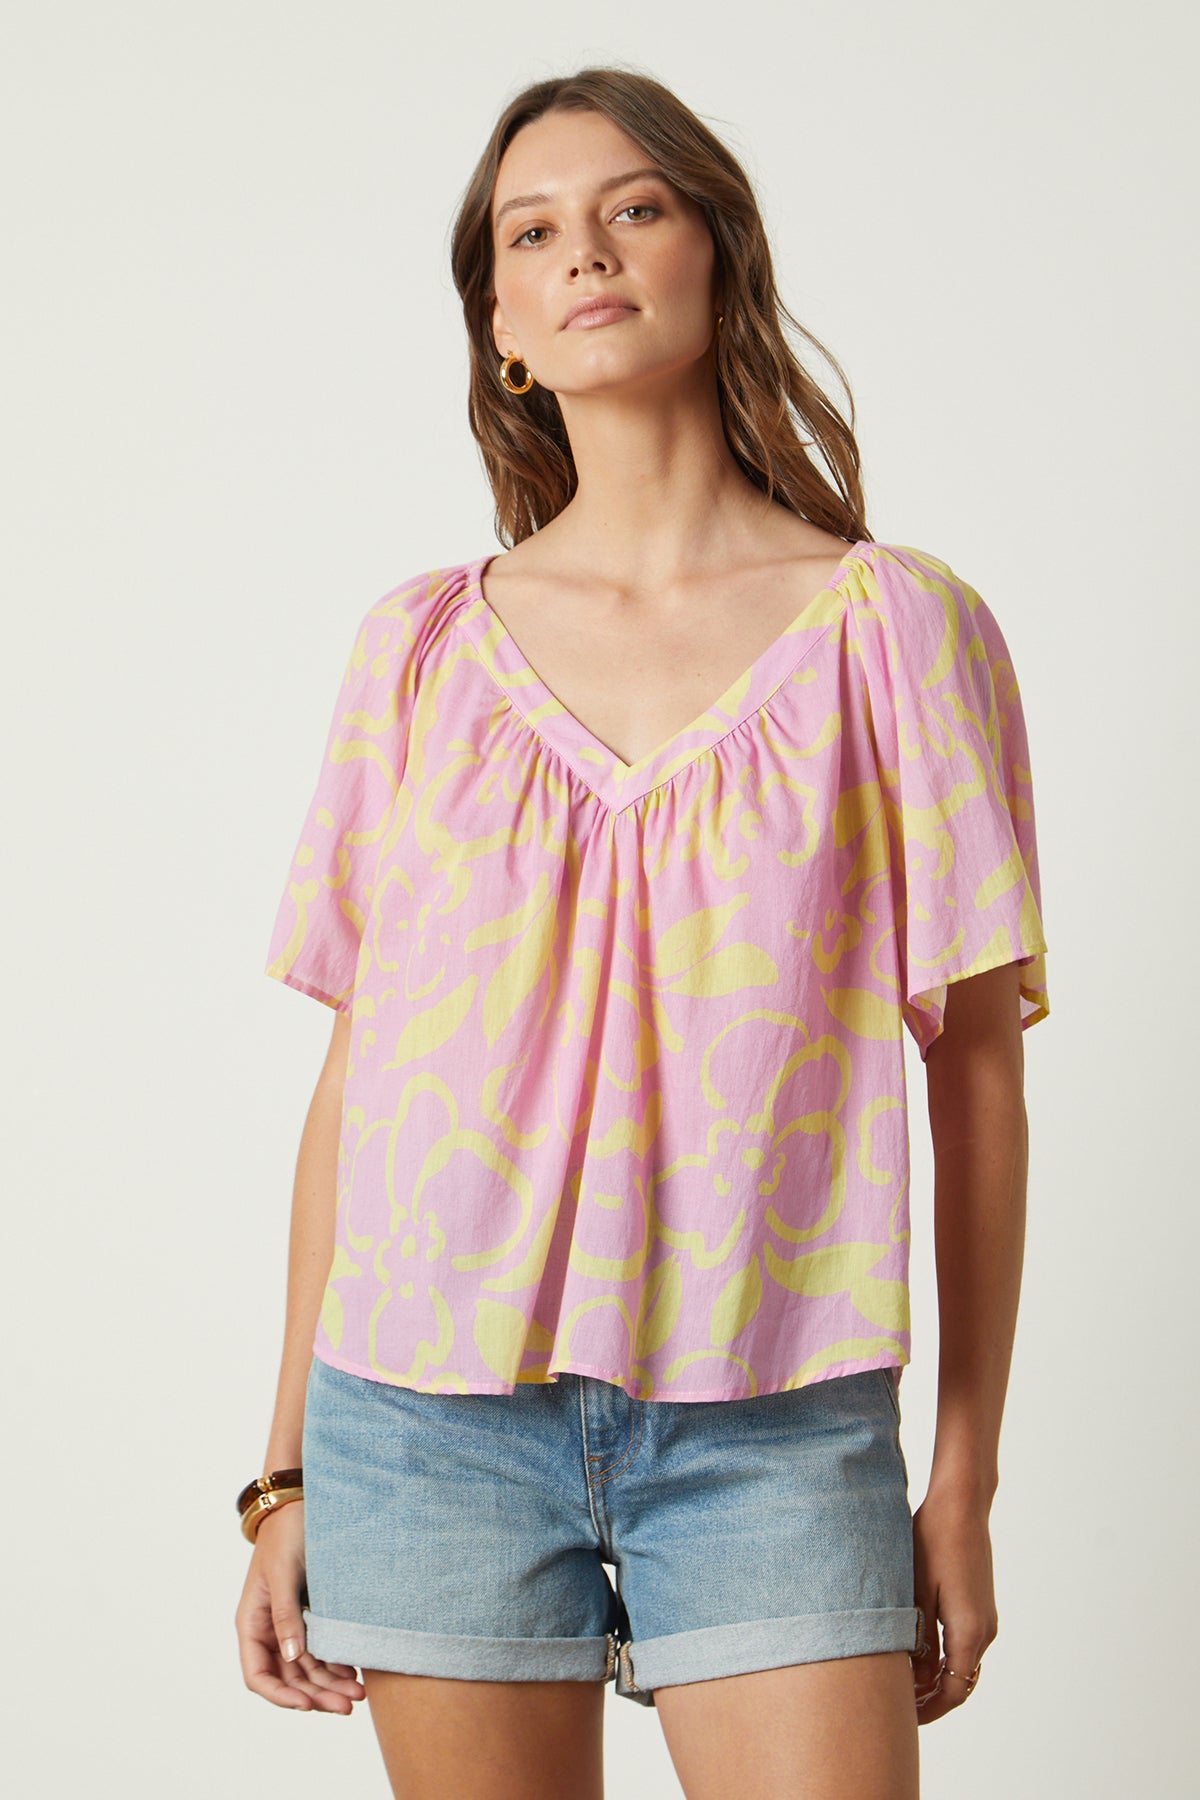 Liliana Top in print with pink and yellow front-25954331361473